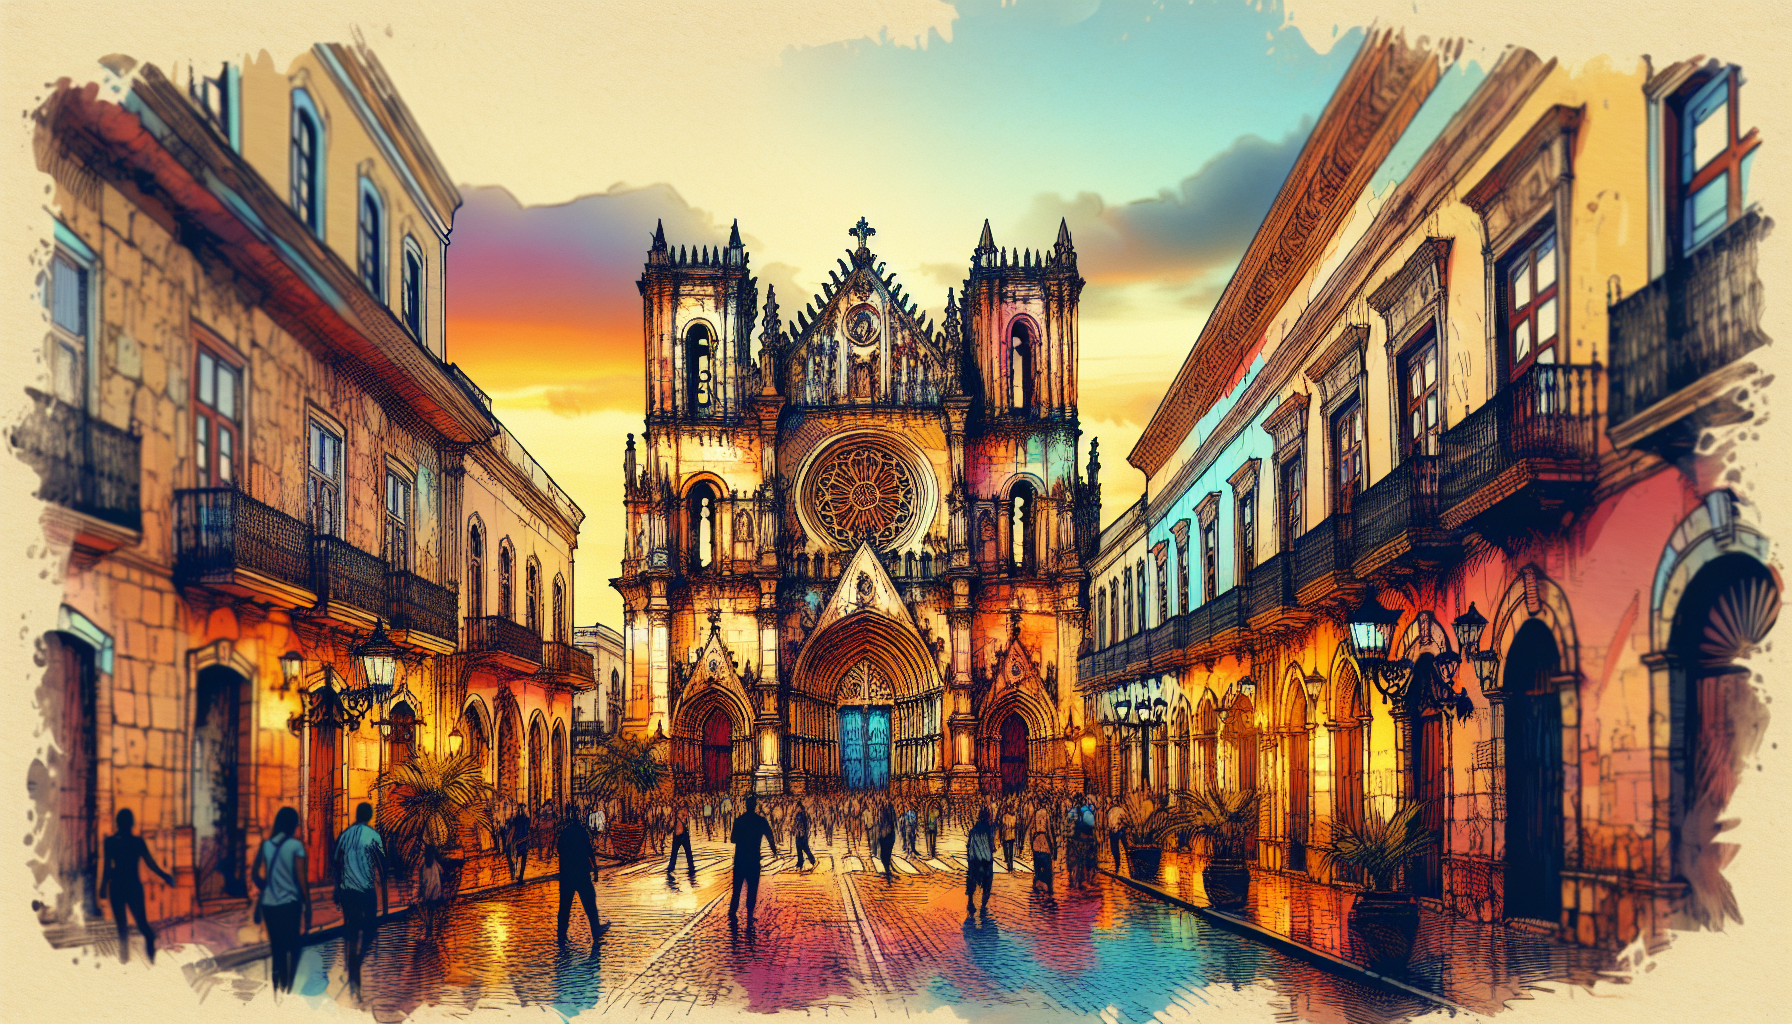 Stunning digital artwork of the iconic Cathedral of Santa María la Menor, bathed in sunset light with vibrant street life of Santo Domingo, Dominican Republic, showcasing a blend of Gothic and Baroque